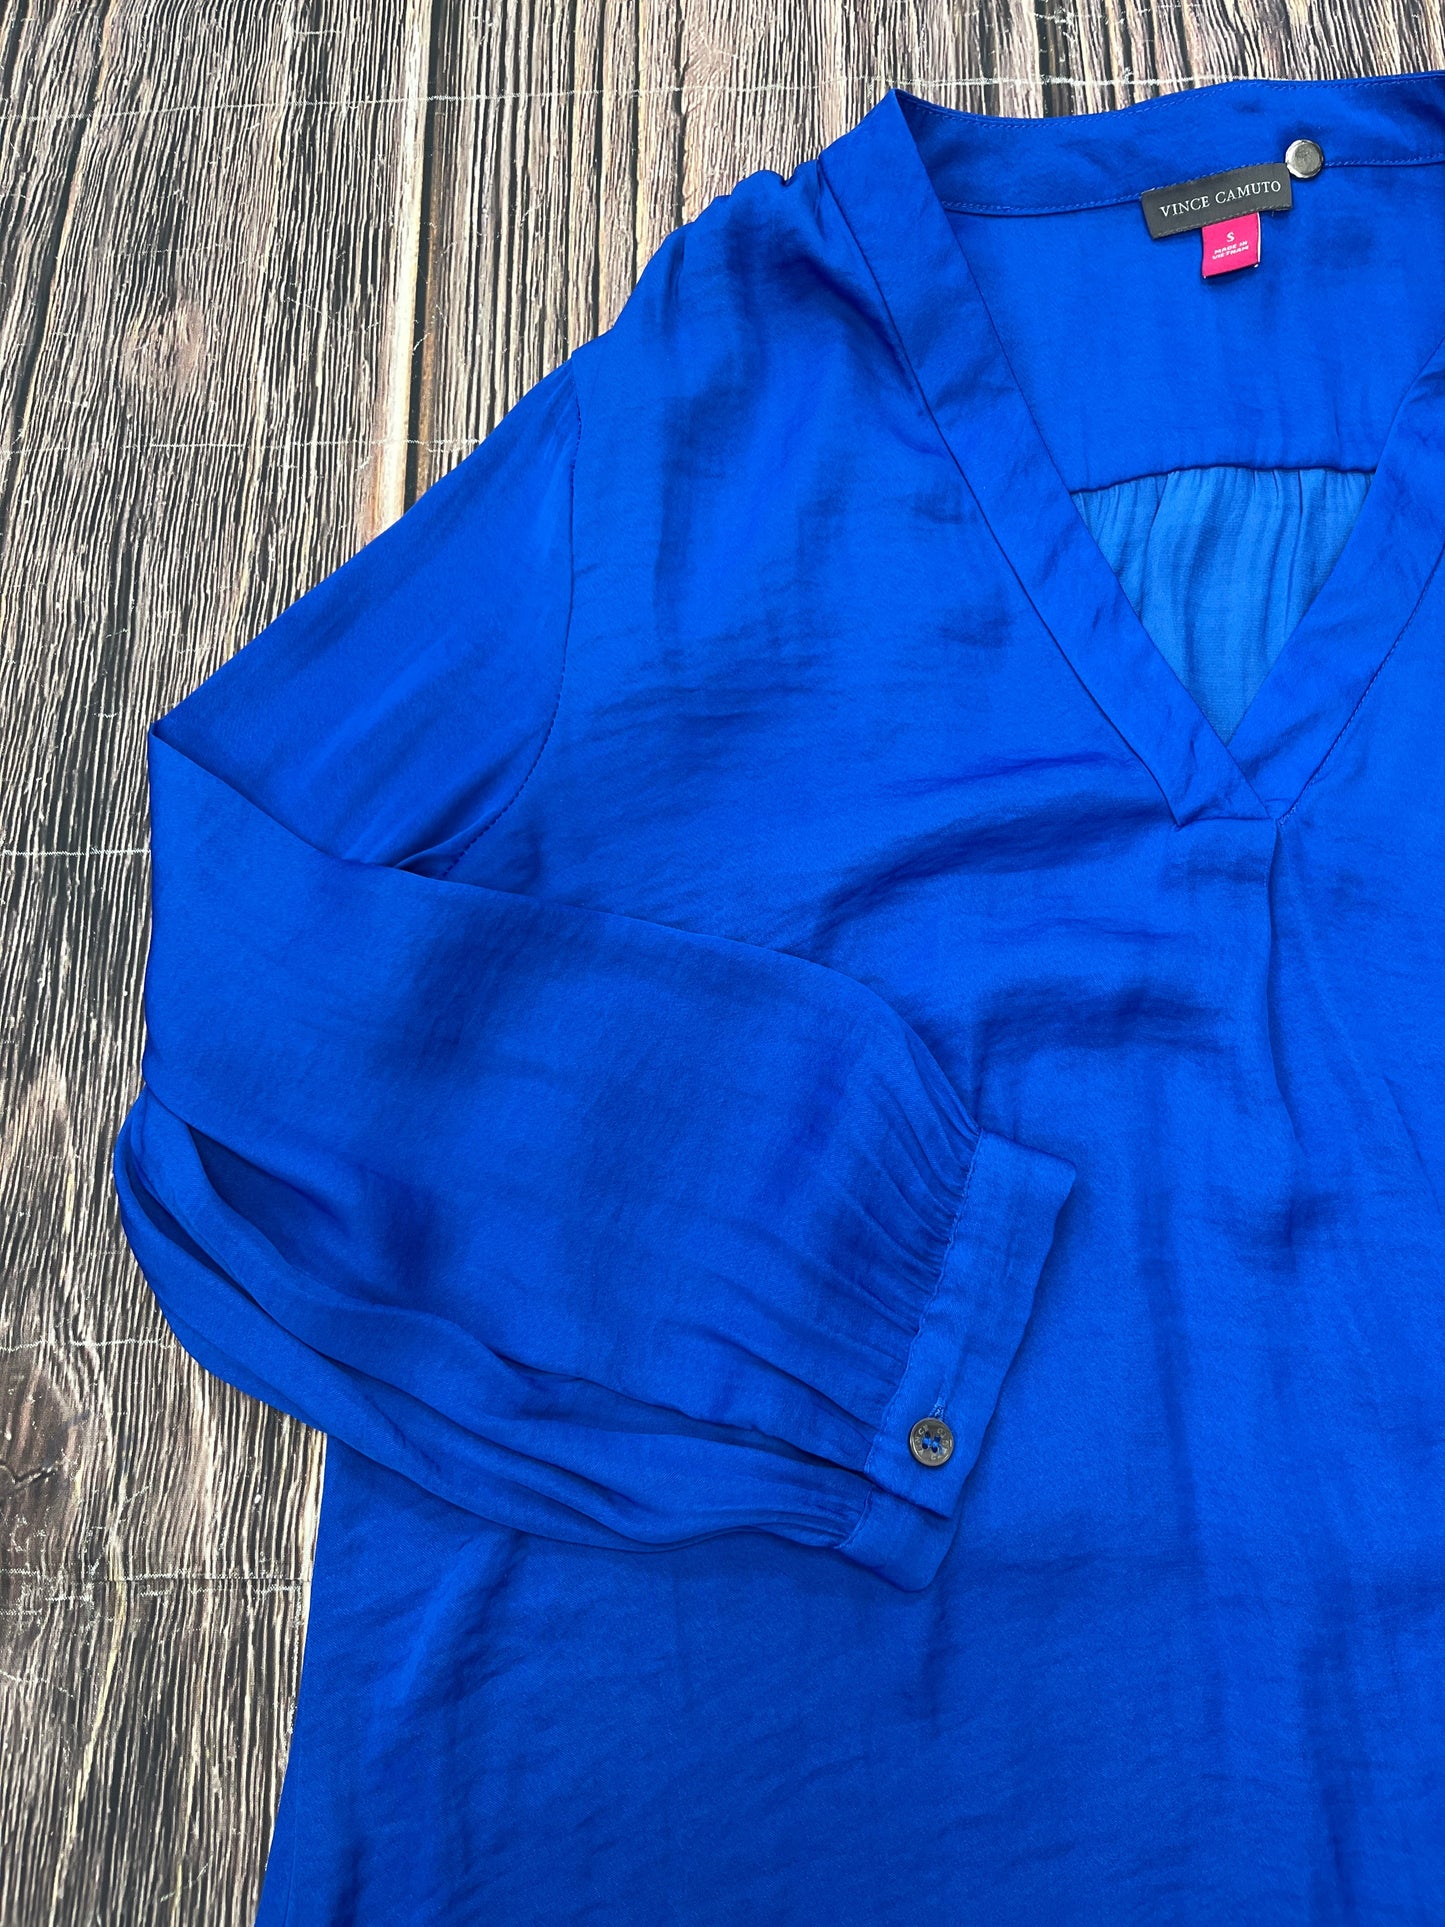 Blue Top Long Sleeve Vince Camuto, Size S